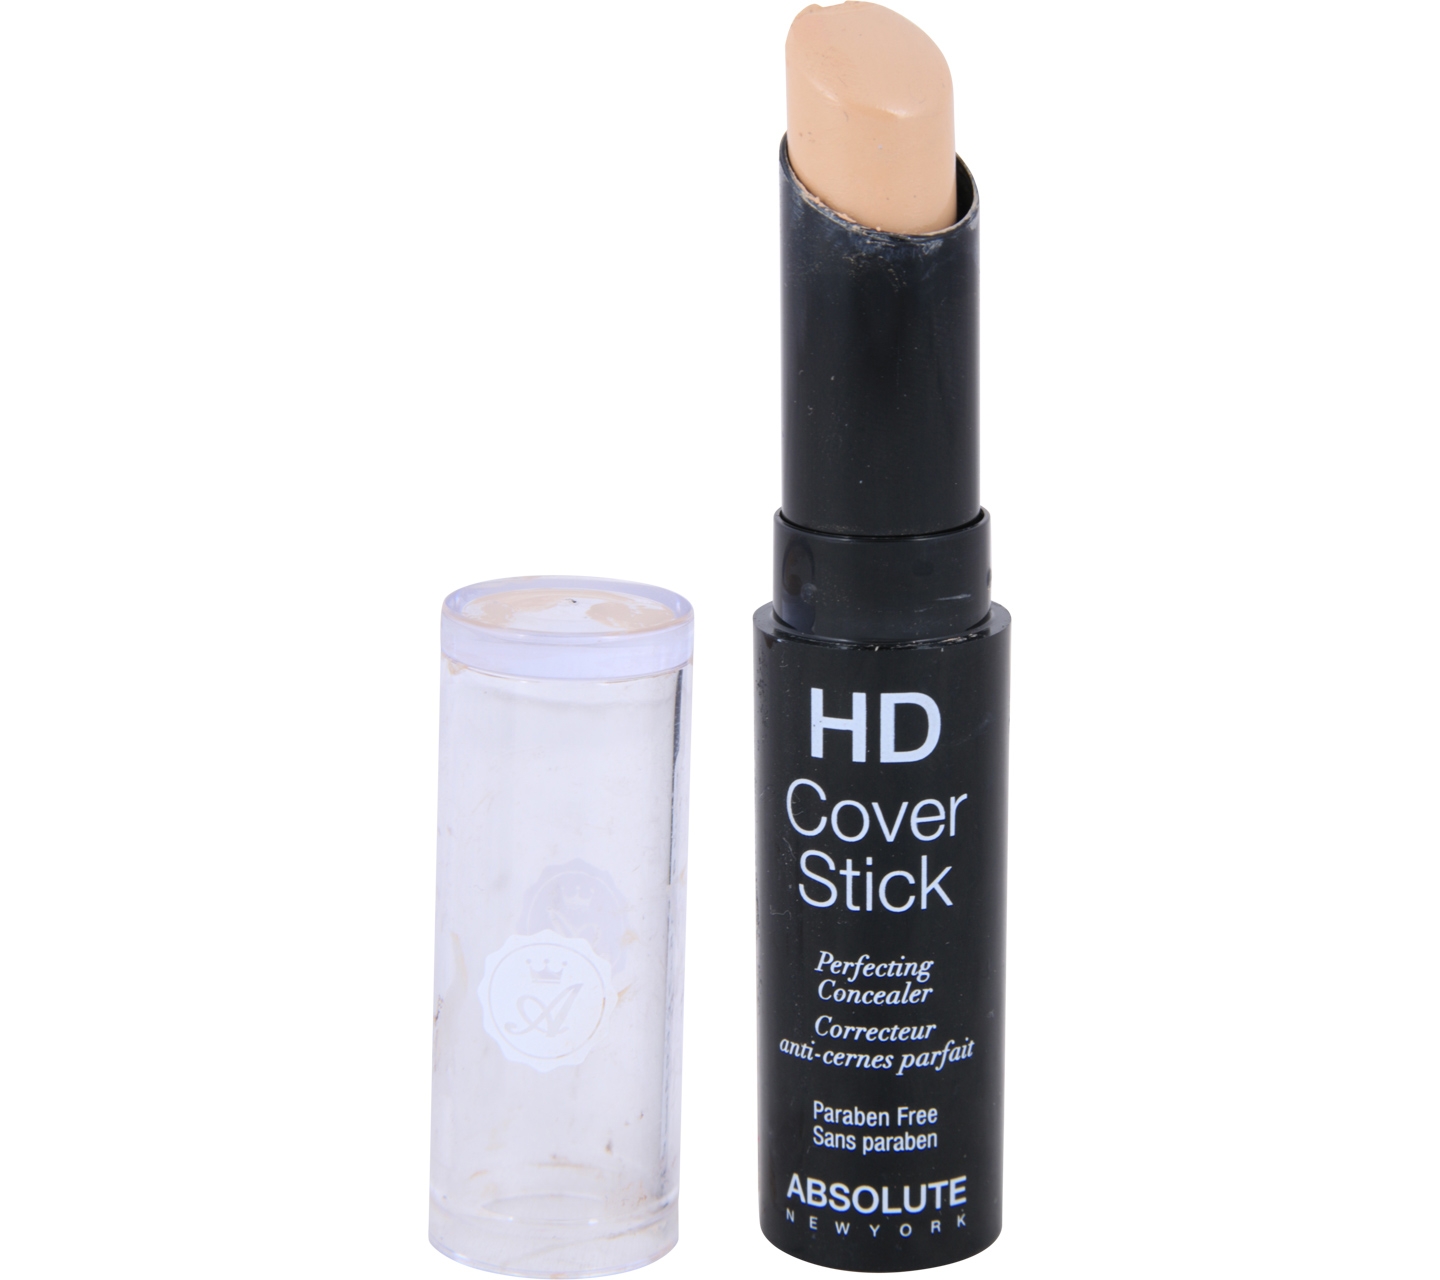 Absolute Bare Beige HD Cover Stick Perfecting Concealer Faces